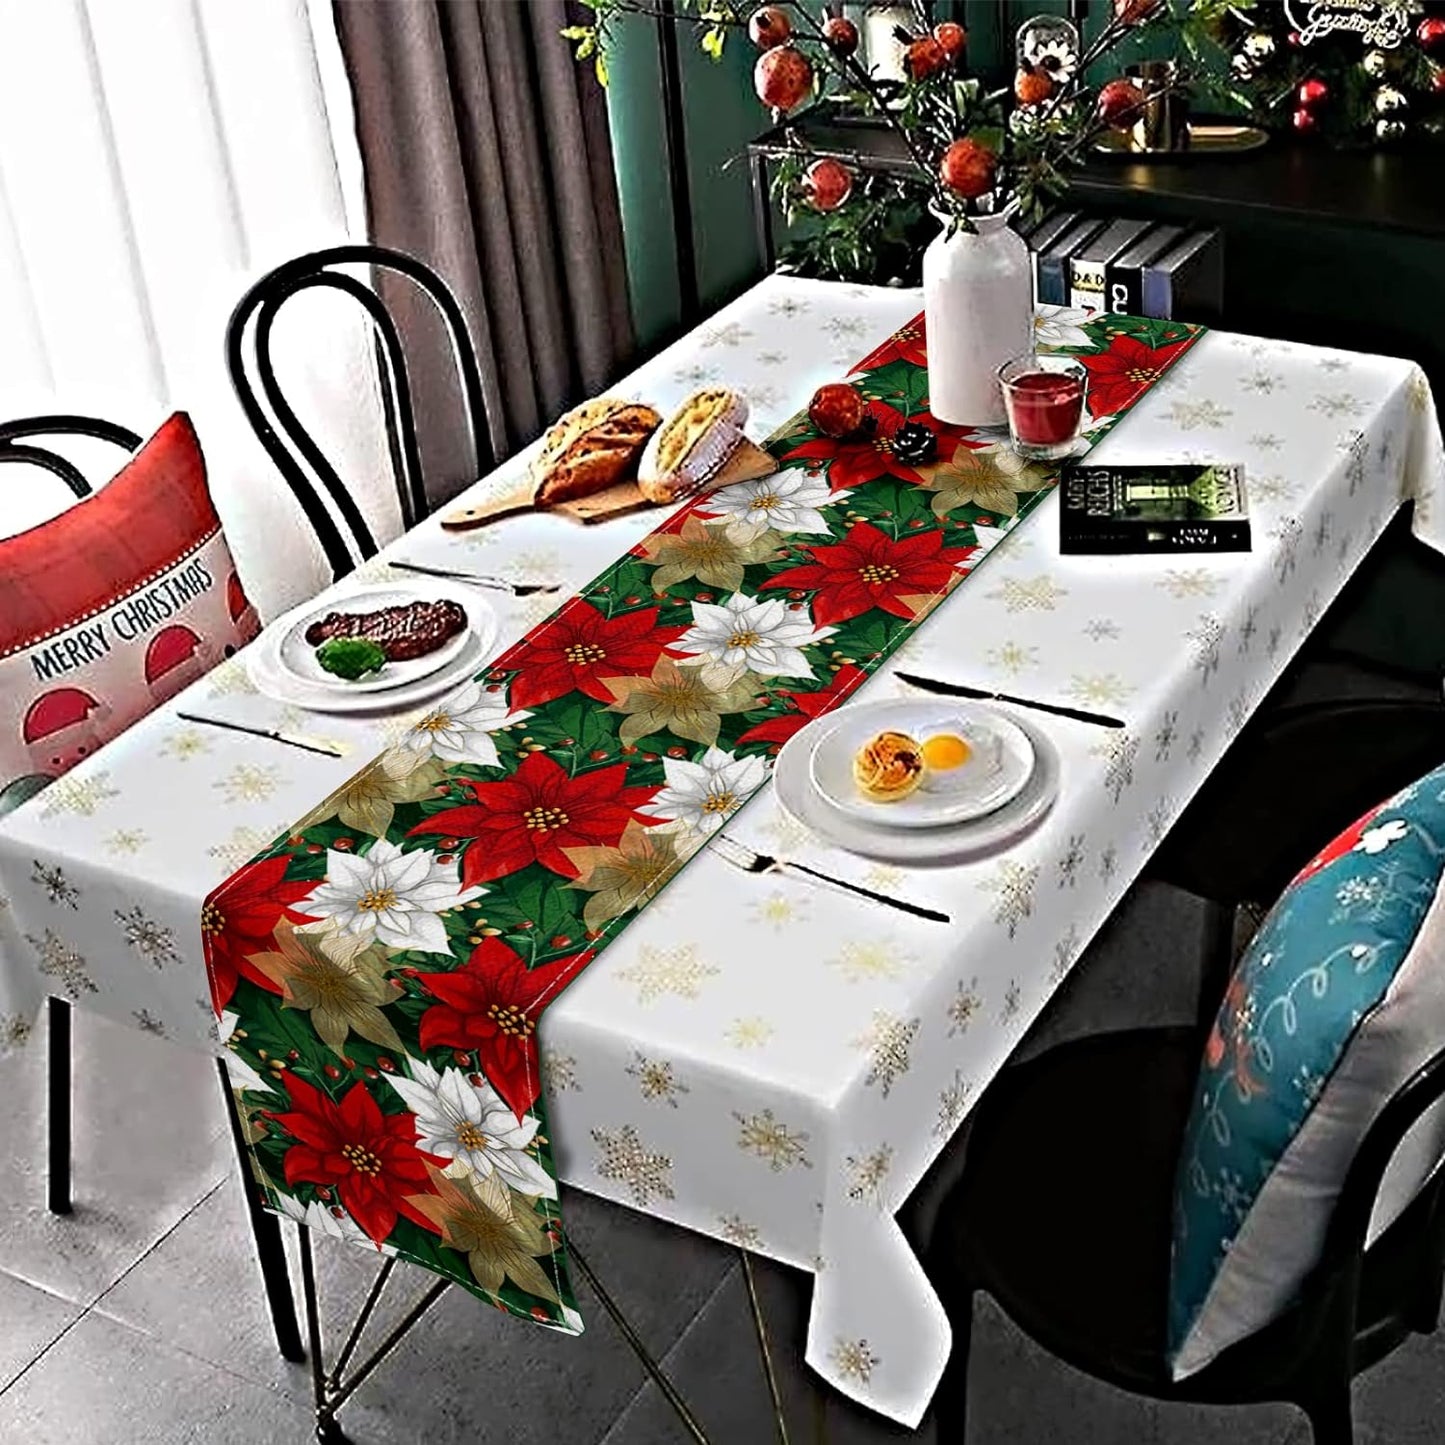 Seasonal Elegance: PROCIDA Red and Gold Poinsettia Table Runner - 13x72 Inch Xmas Winter Burlap Table Runner for Holiday Kitchen, Dining, and Party Decor, Indoor and Outdoor